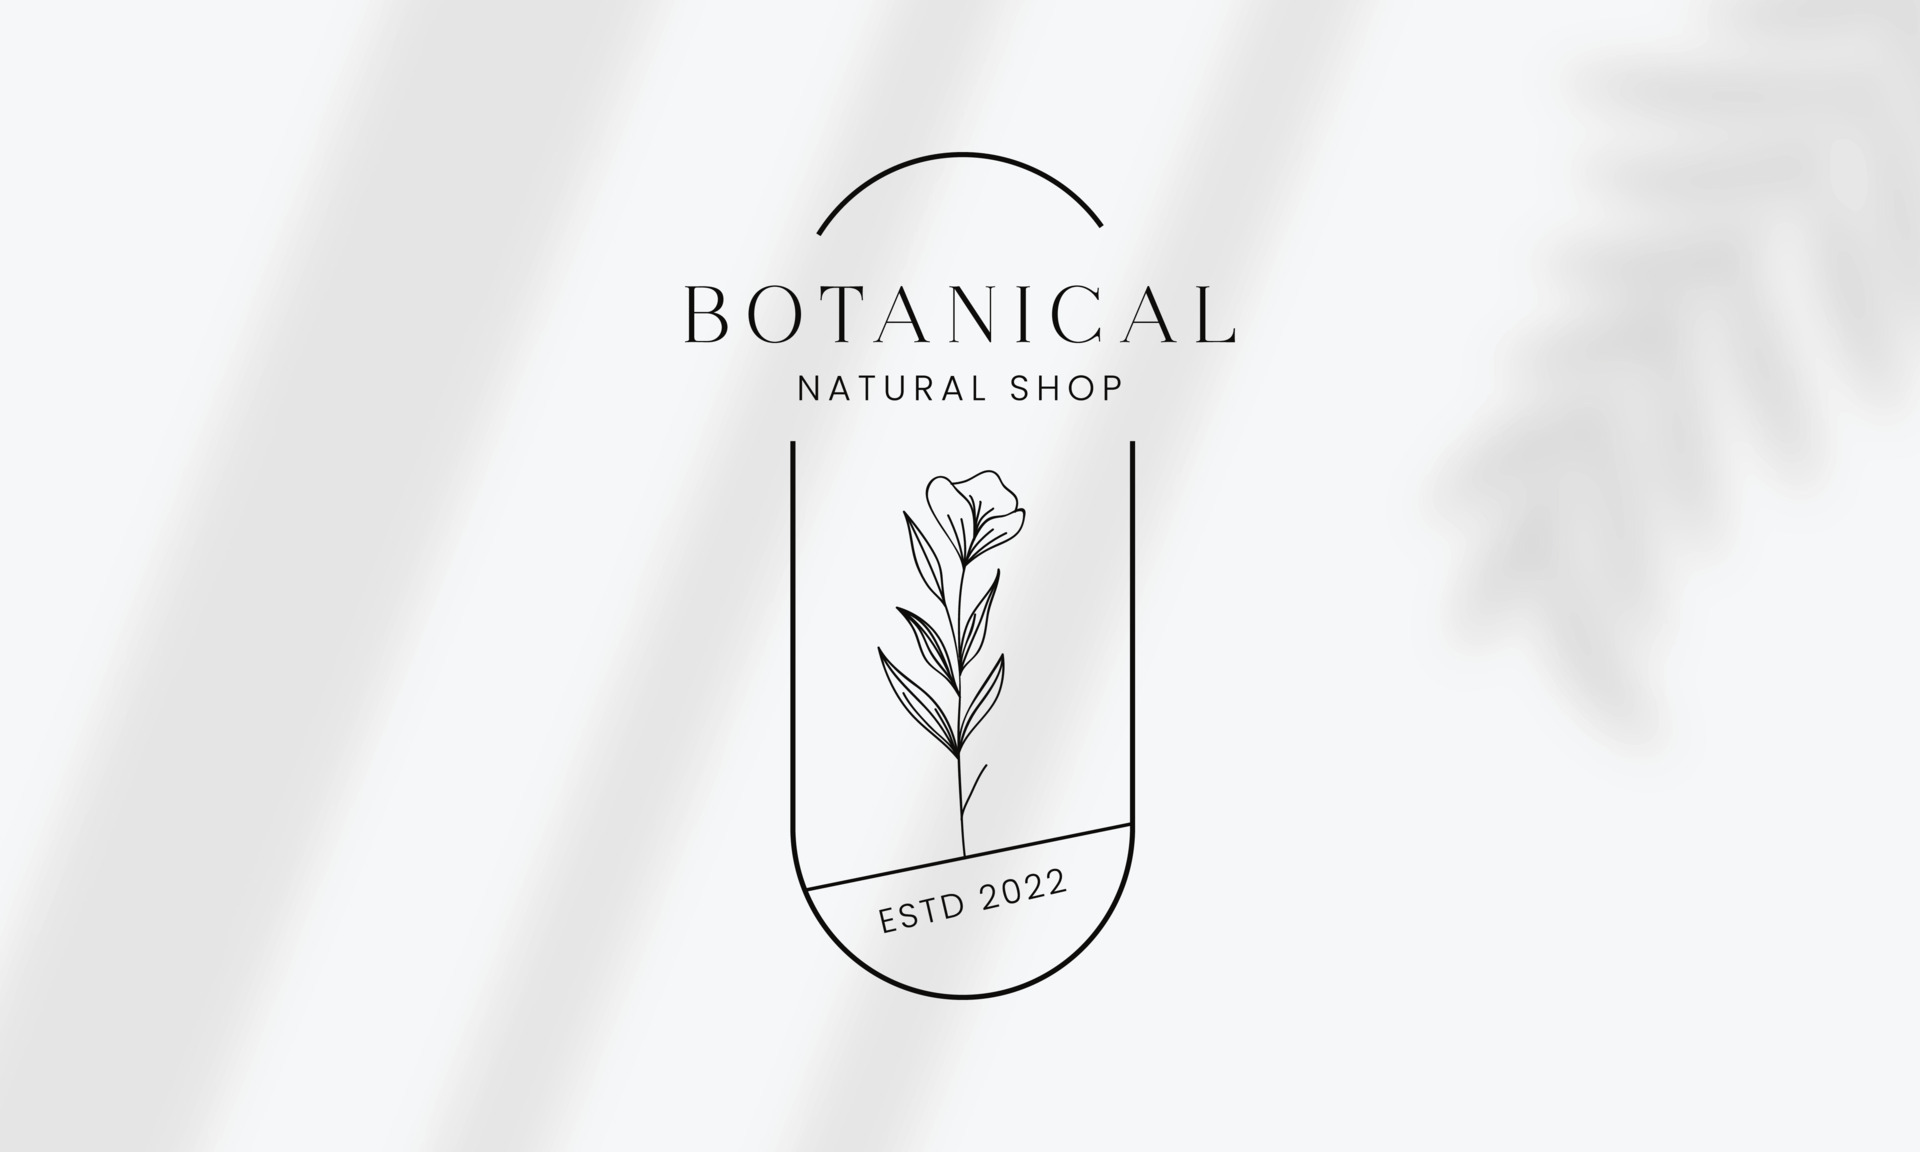 Botanical Floral element Hand Drawn Logo with Wild Flower and Leaves ...